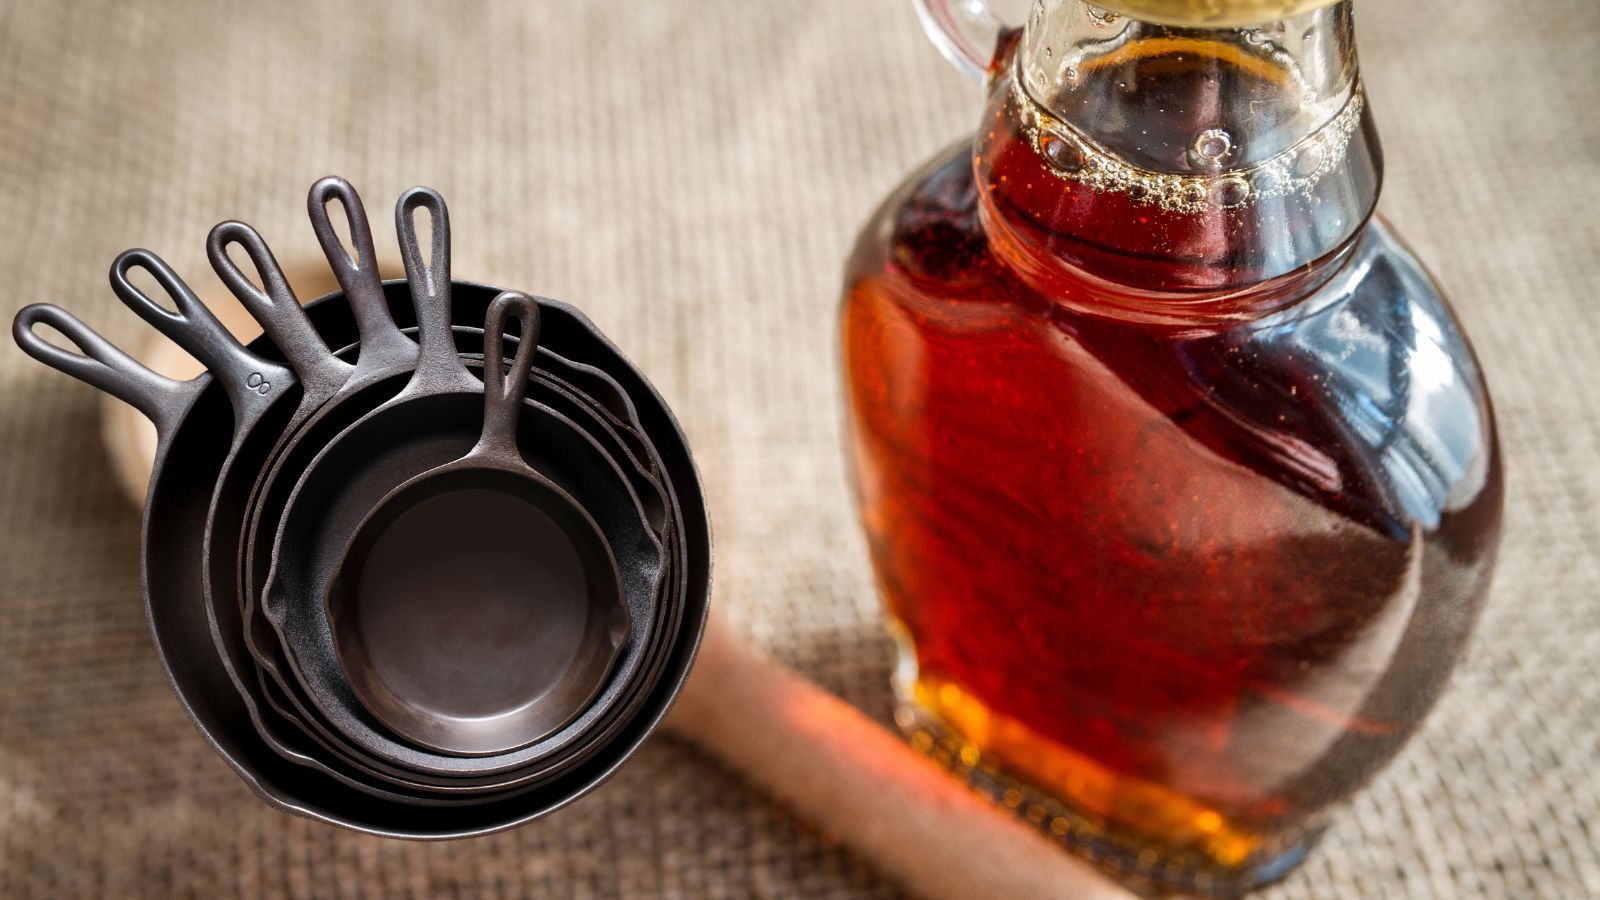 Cooking syrup in cast iron - familyguidecentral.com